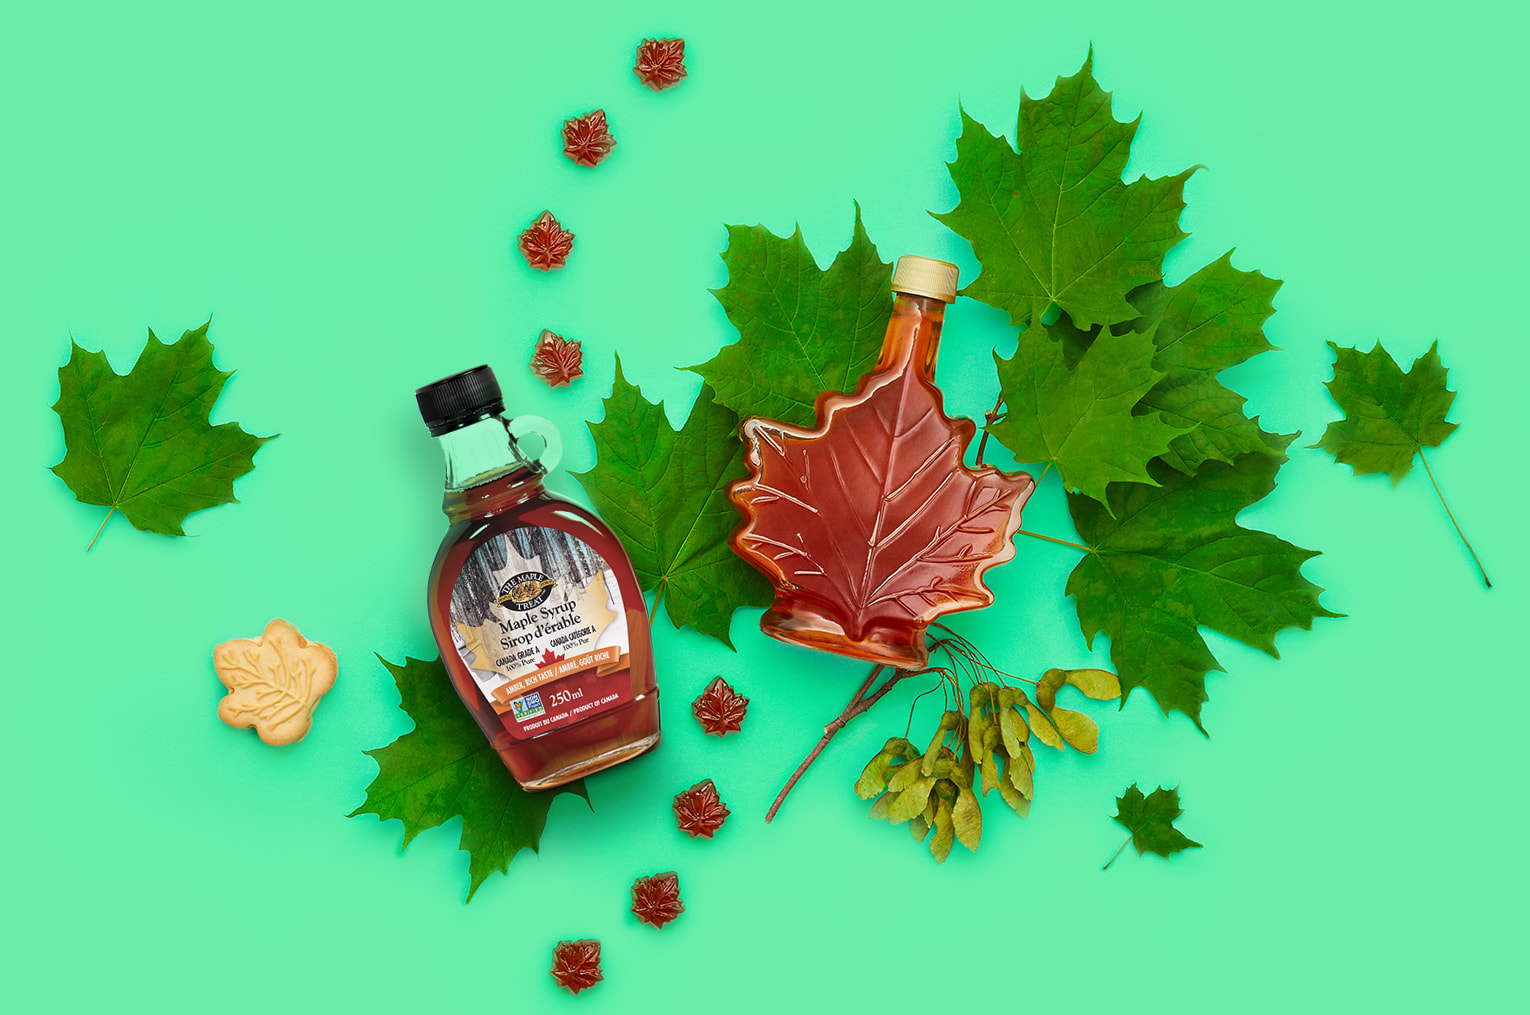 Glass maple syrup bottles against a green background with green maple leaves, maple seeds, maple candies and a cookie.